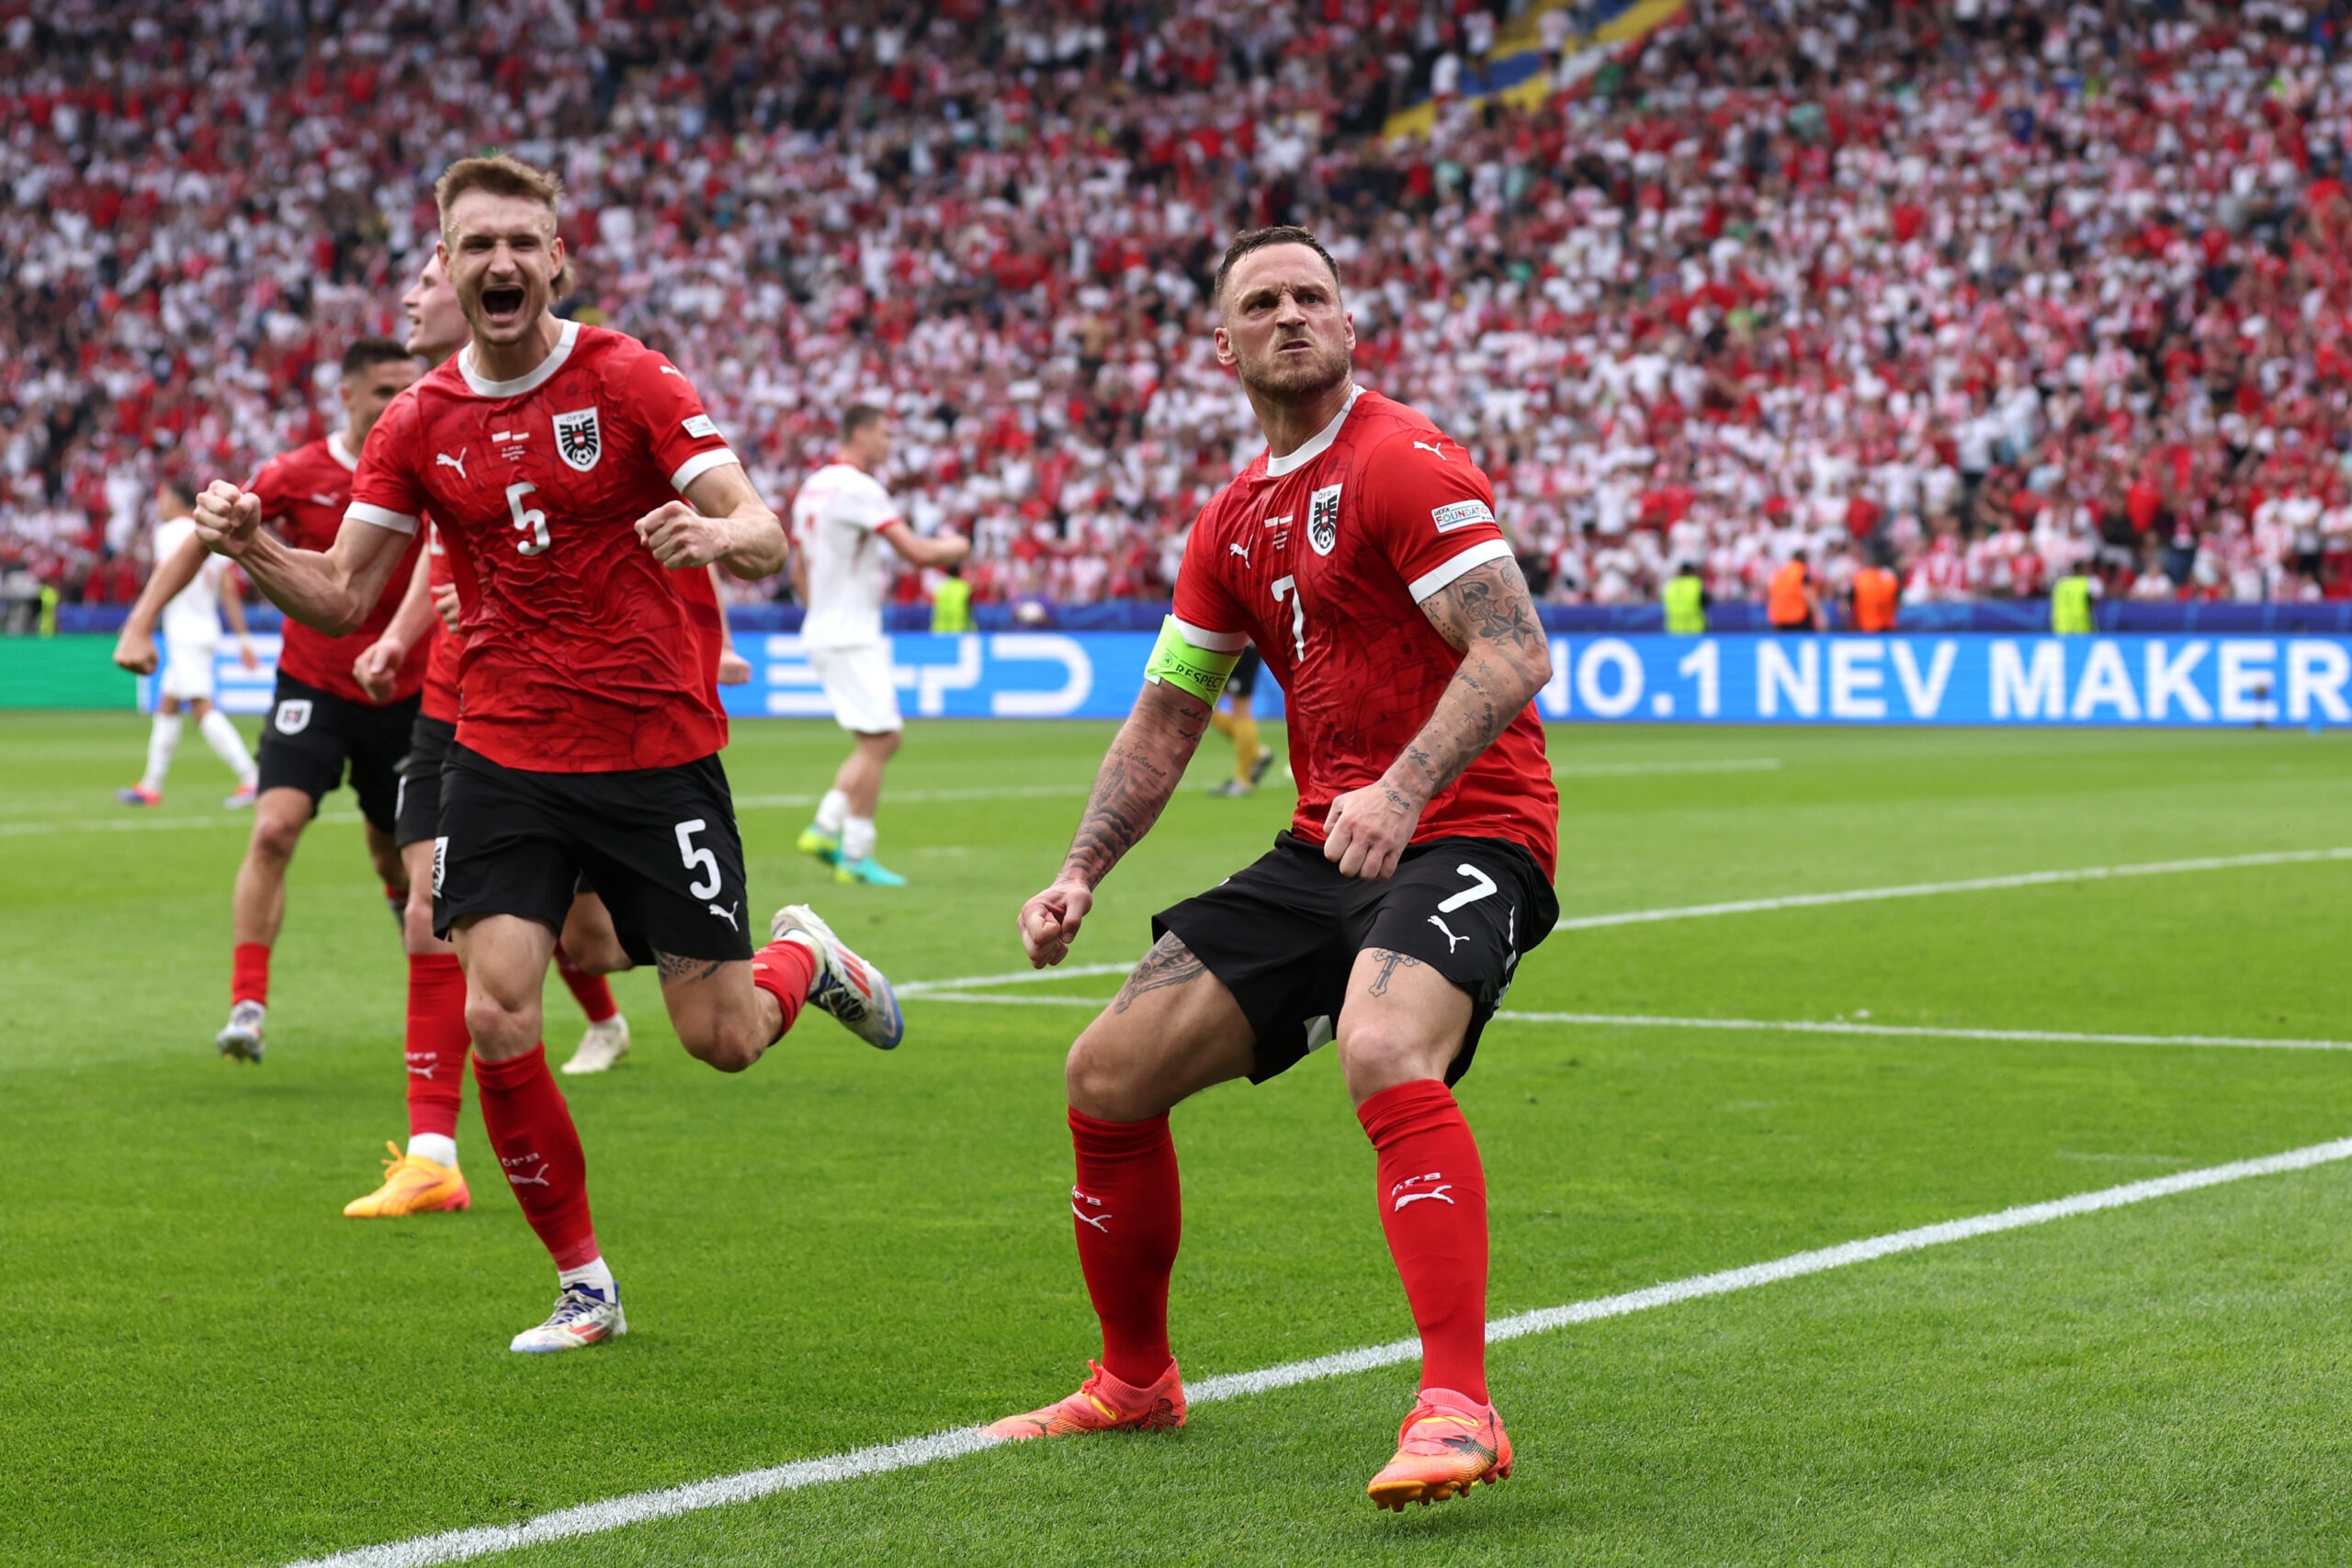 Poland 1-3 Austria Stats: Austrians Poles Apart in Second Half to Give Themselves Last-16 Hope